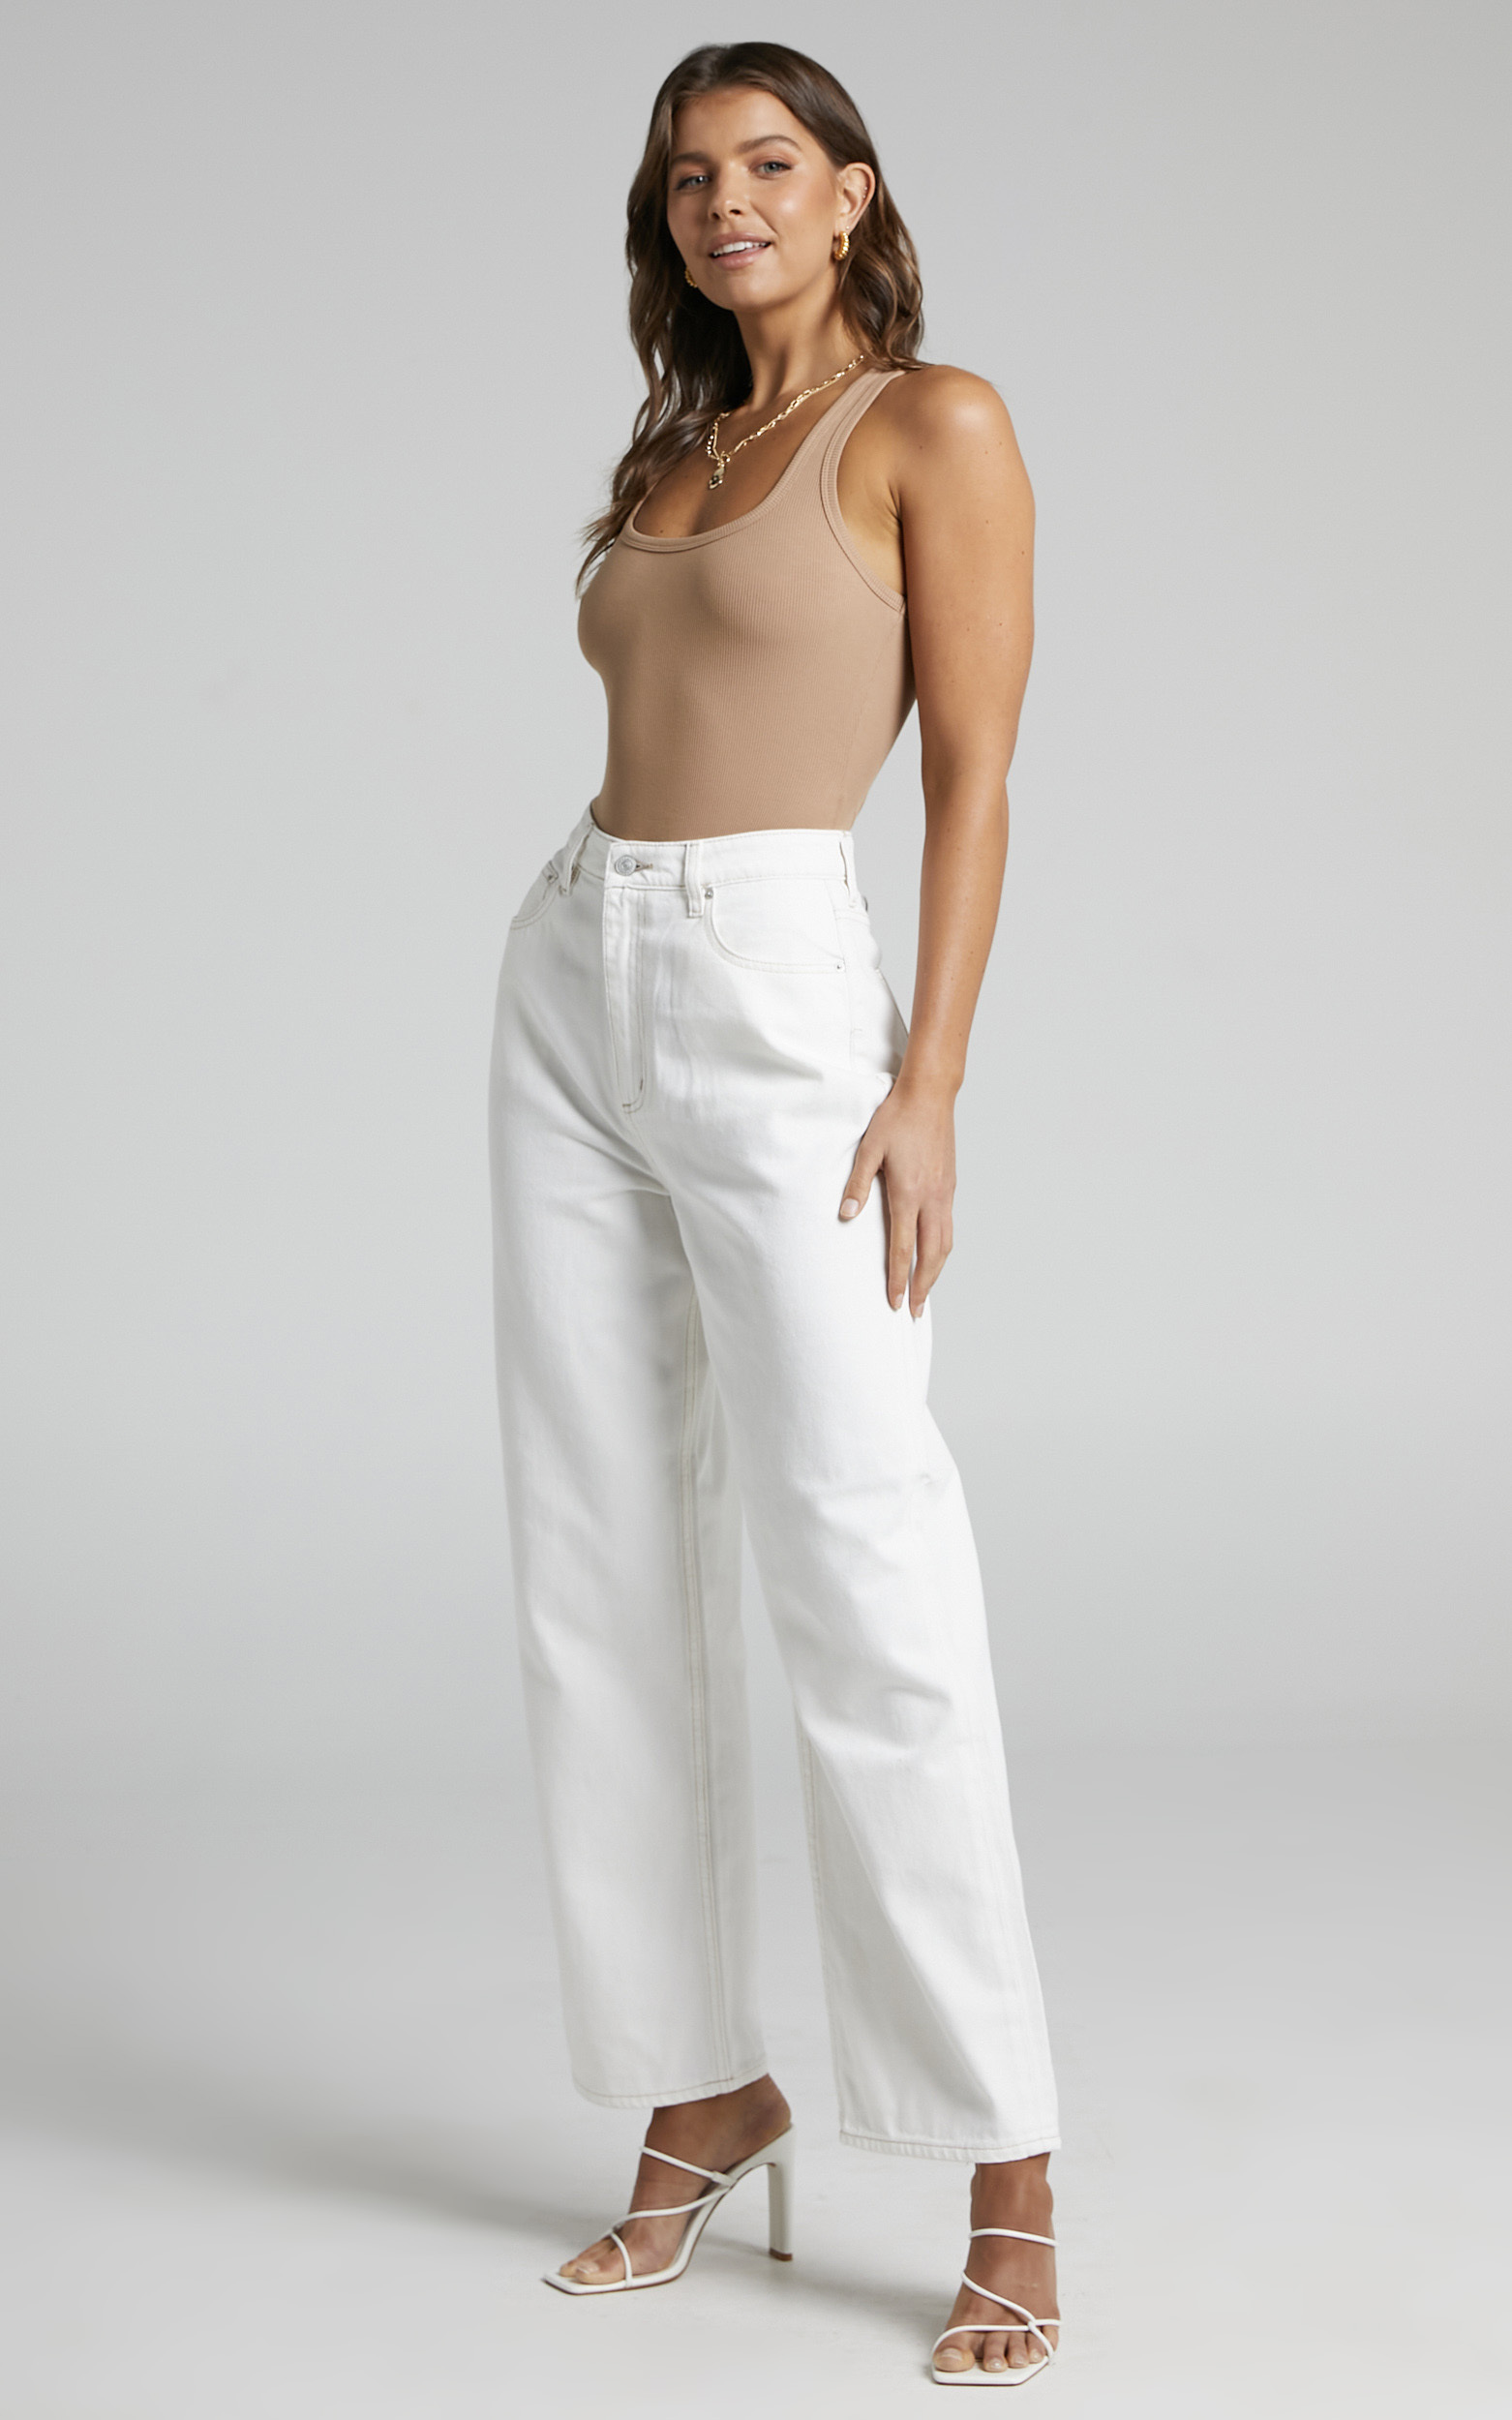 Lee - High Baggy Jeans in Organic White - 06, WHT1, hi-res image number null